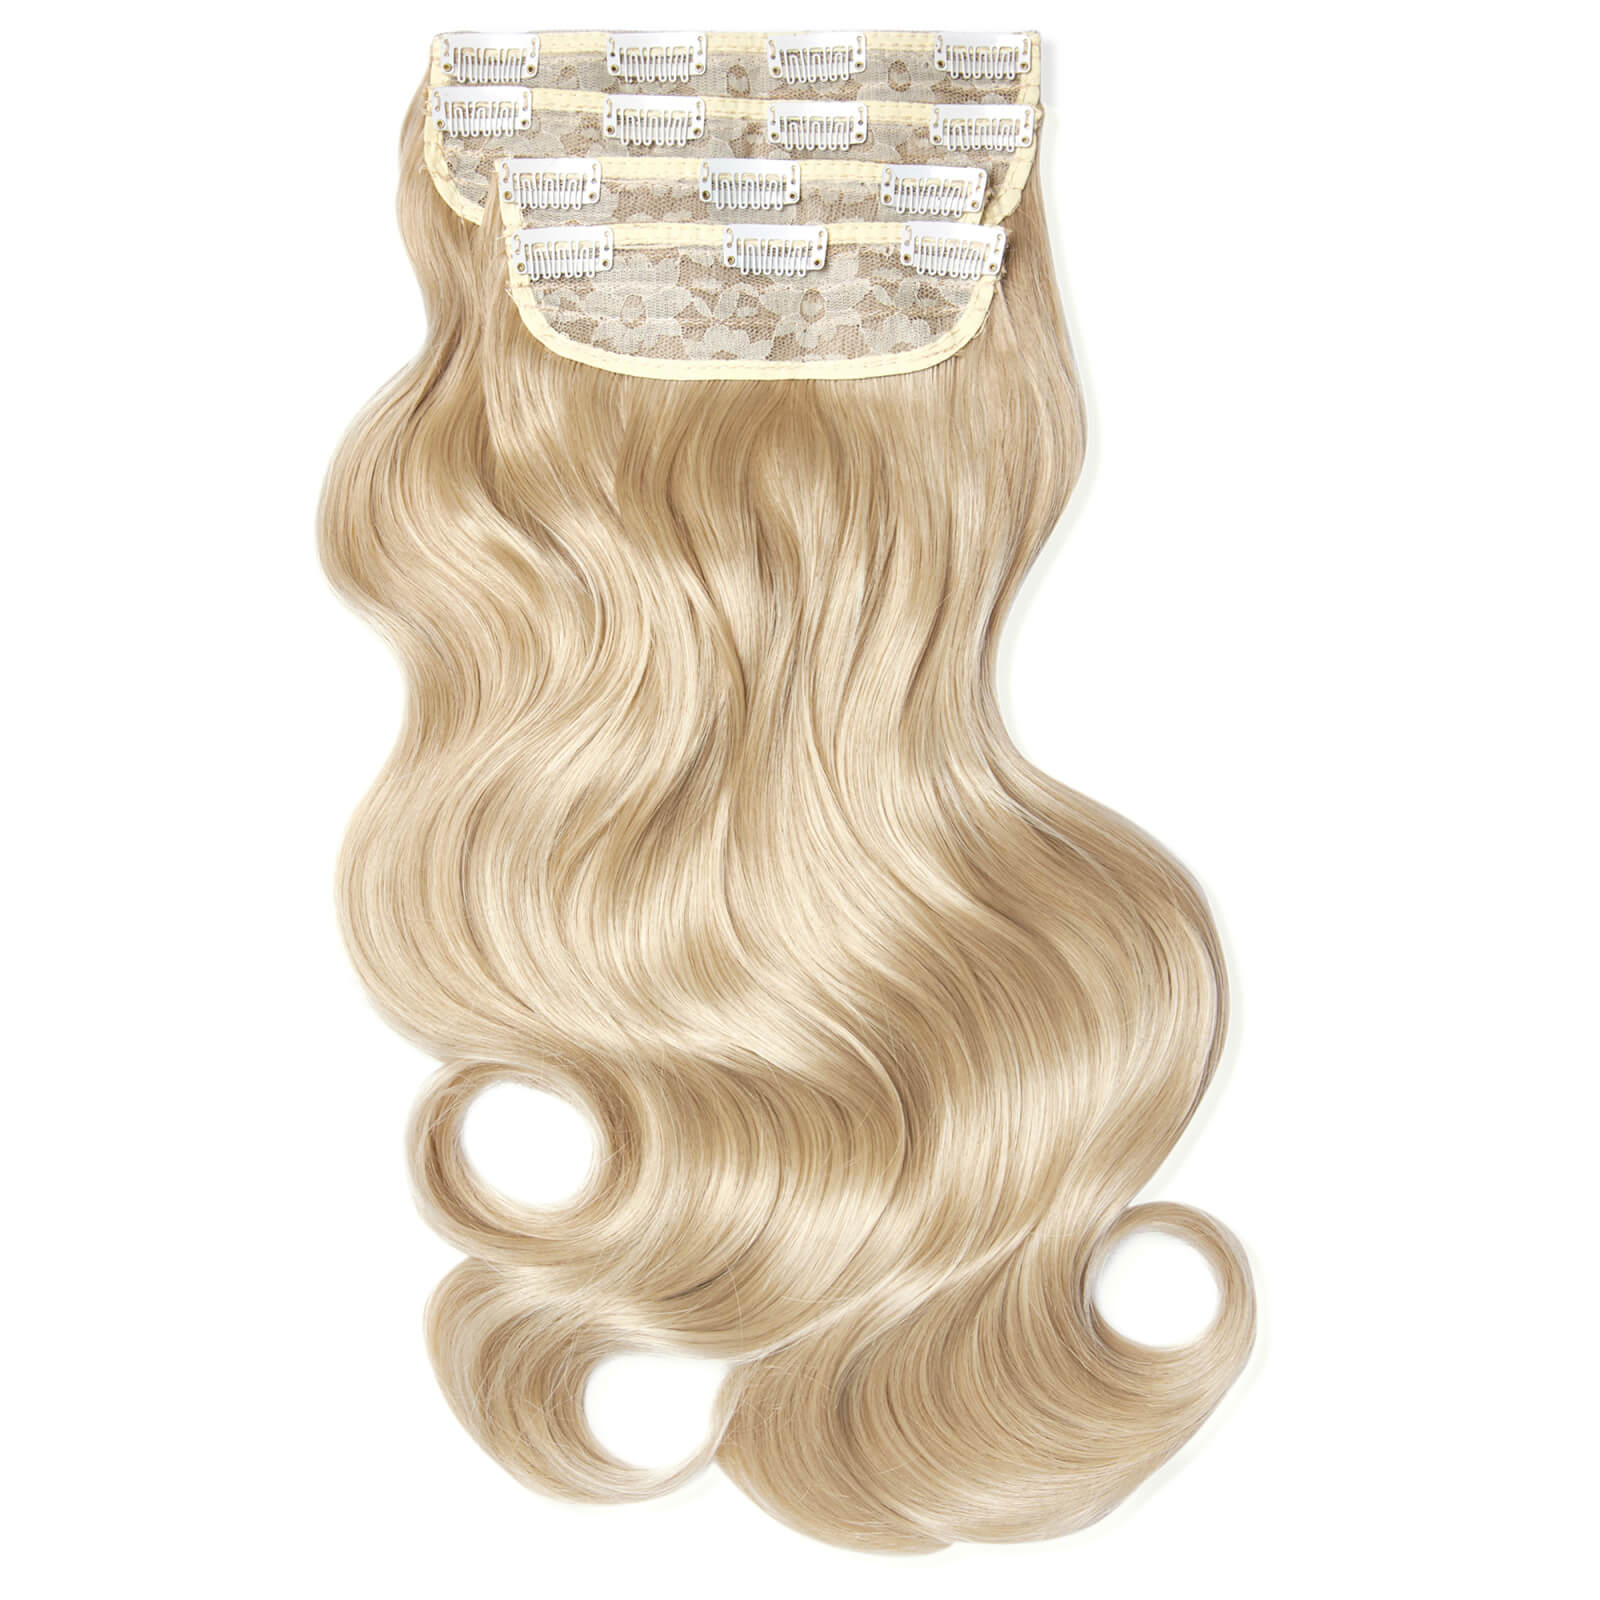 LullaBellz Ultimate Half Up Half Down 22  Curly Extension and Pony Set (Variouse Shades - Light blonde